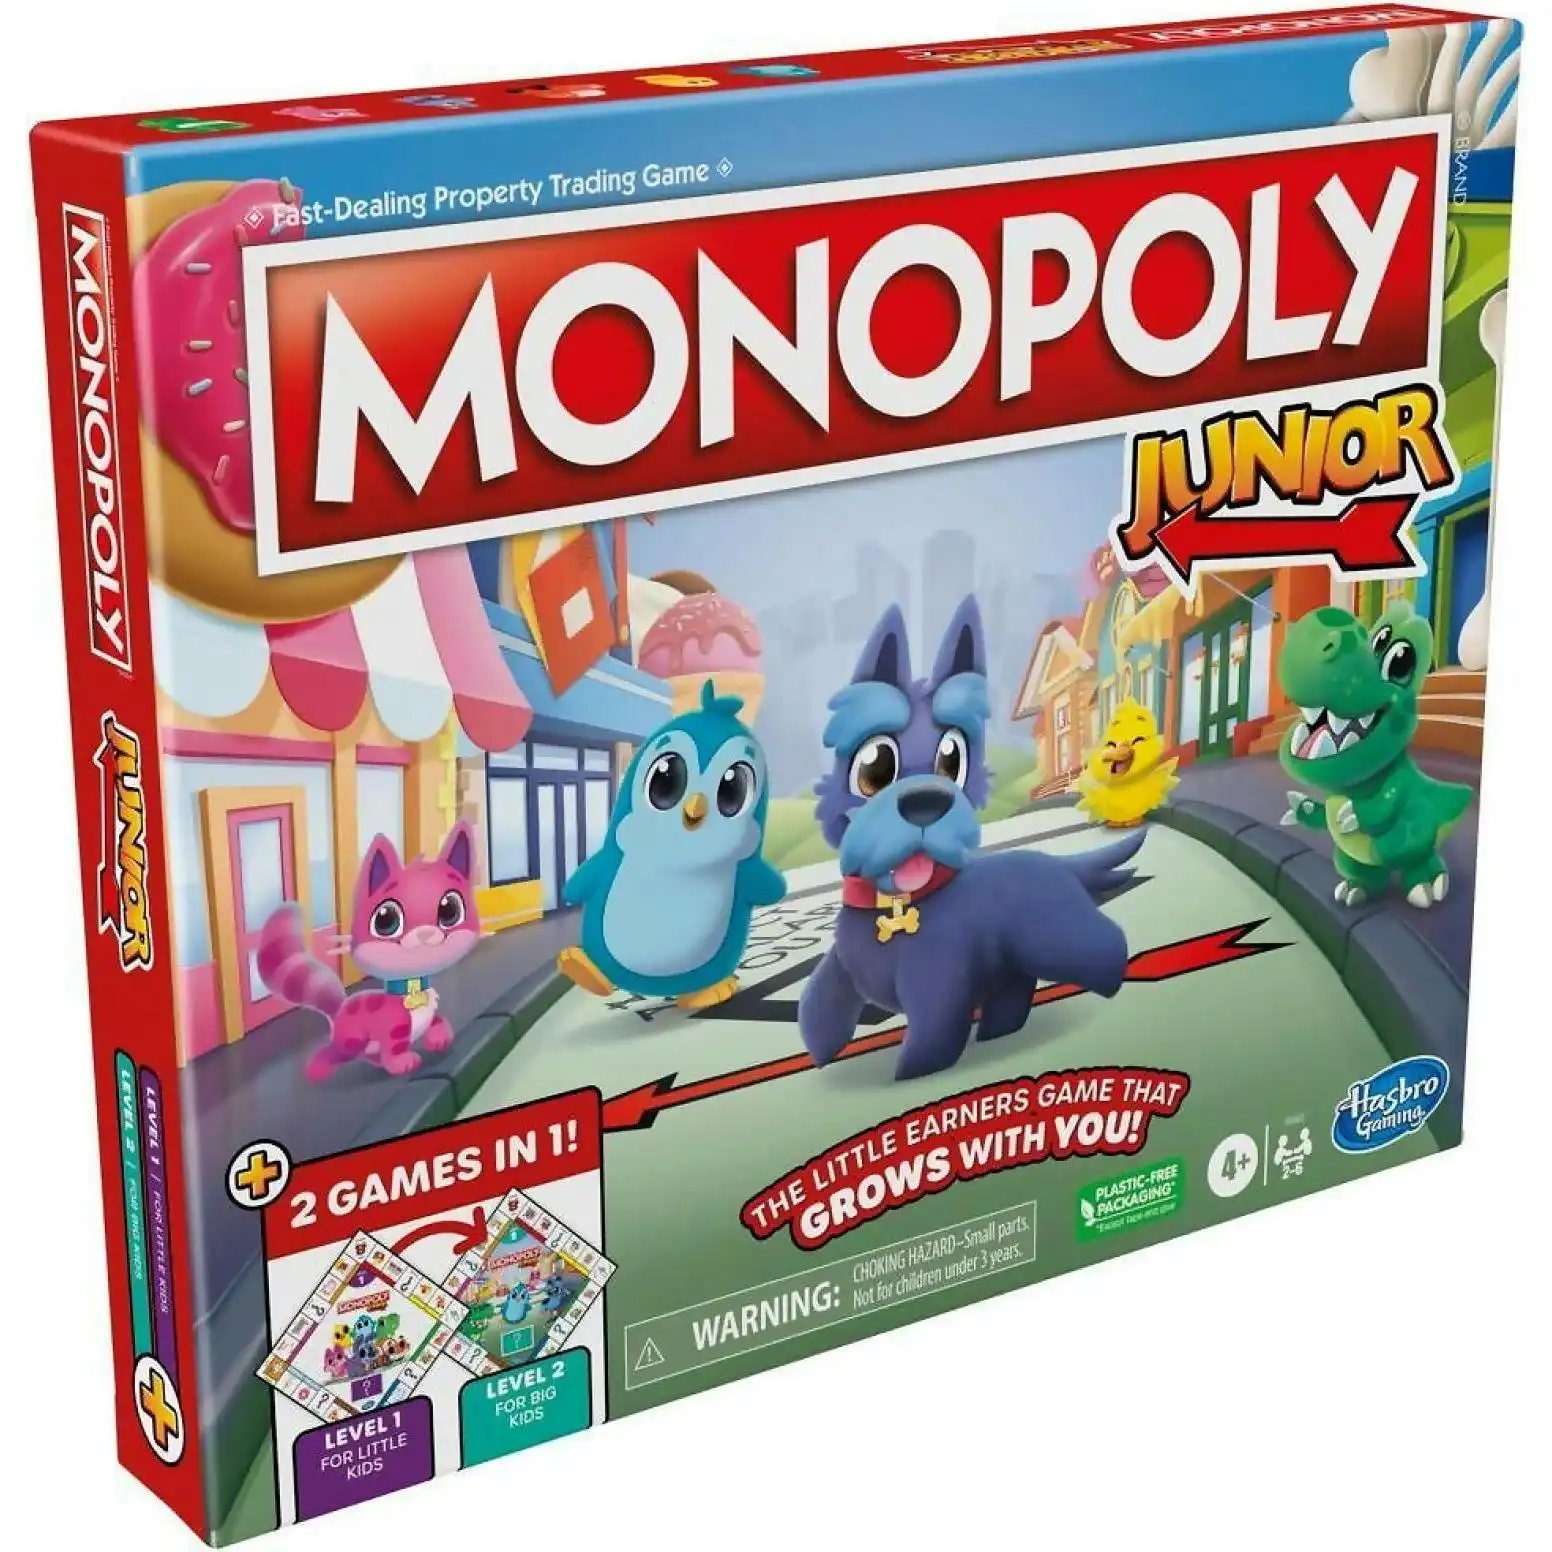 Monopoly - Junior Board Game 2-sided Gameboard 2 Games In 1 Monopoly Game For Ages 4+ - Hasbro